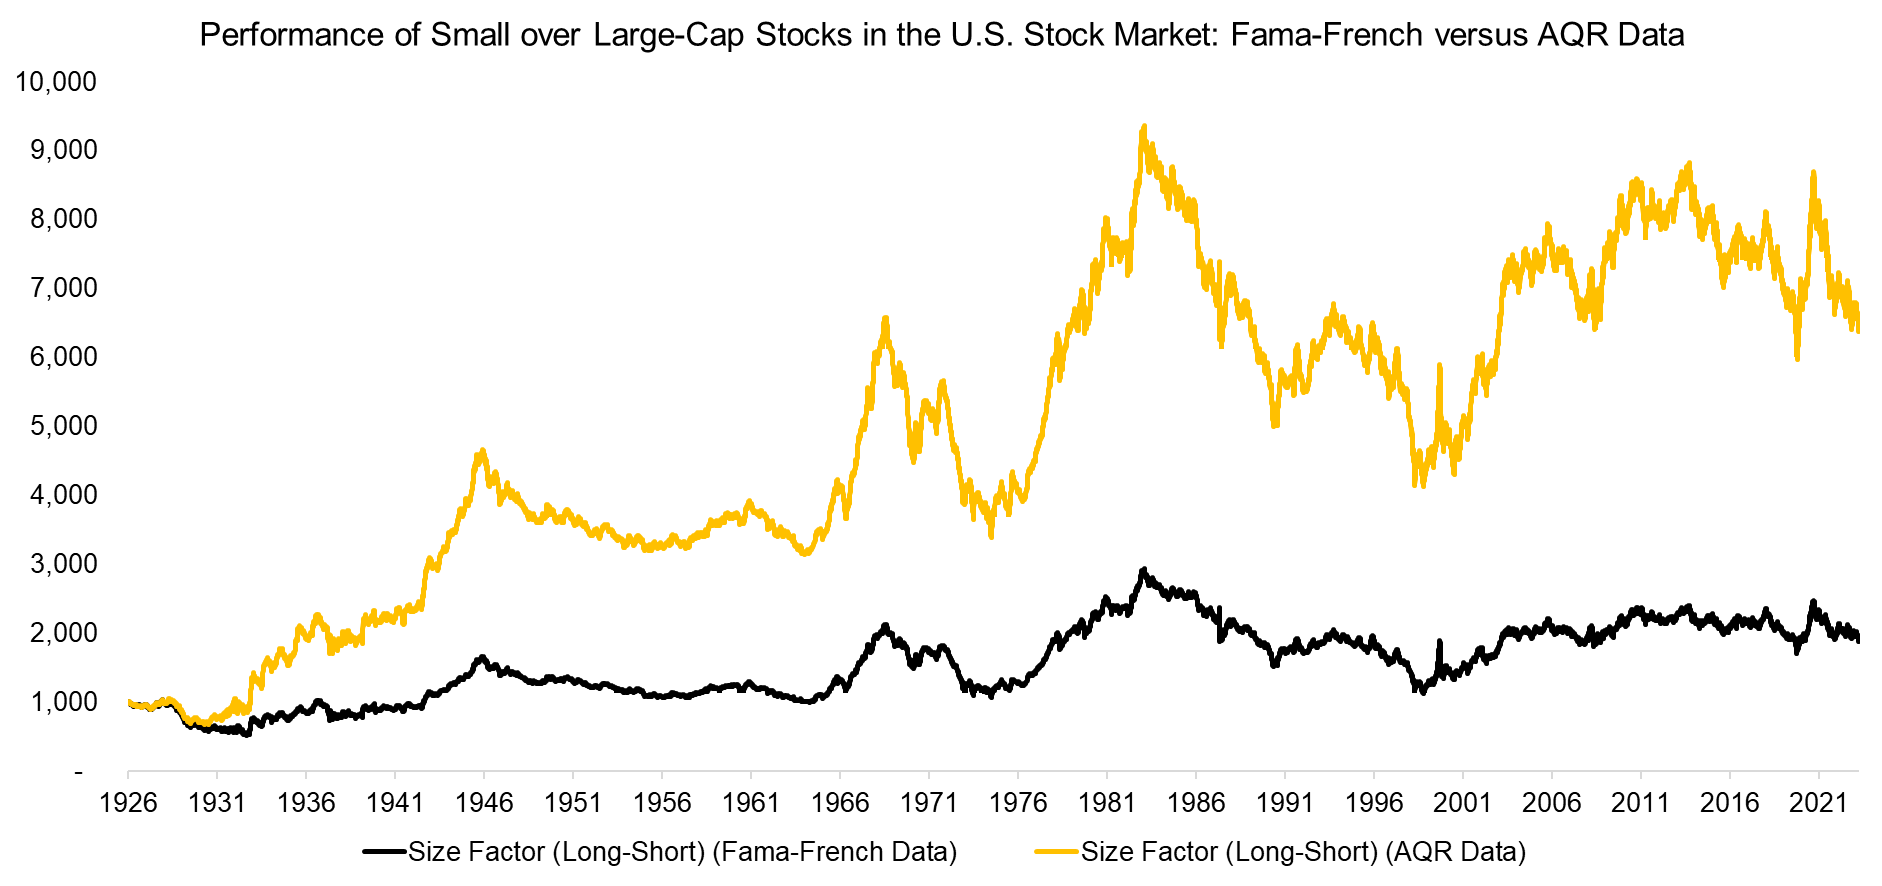 Performance of Small over Large-Cap Stocks in the U.S. Stock Market Fama-French versus AQR Data